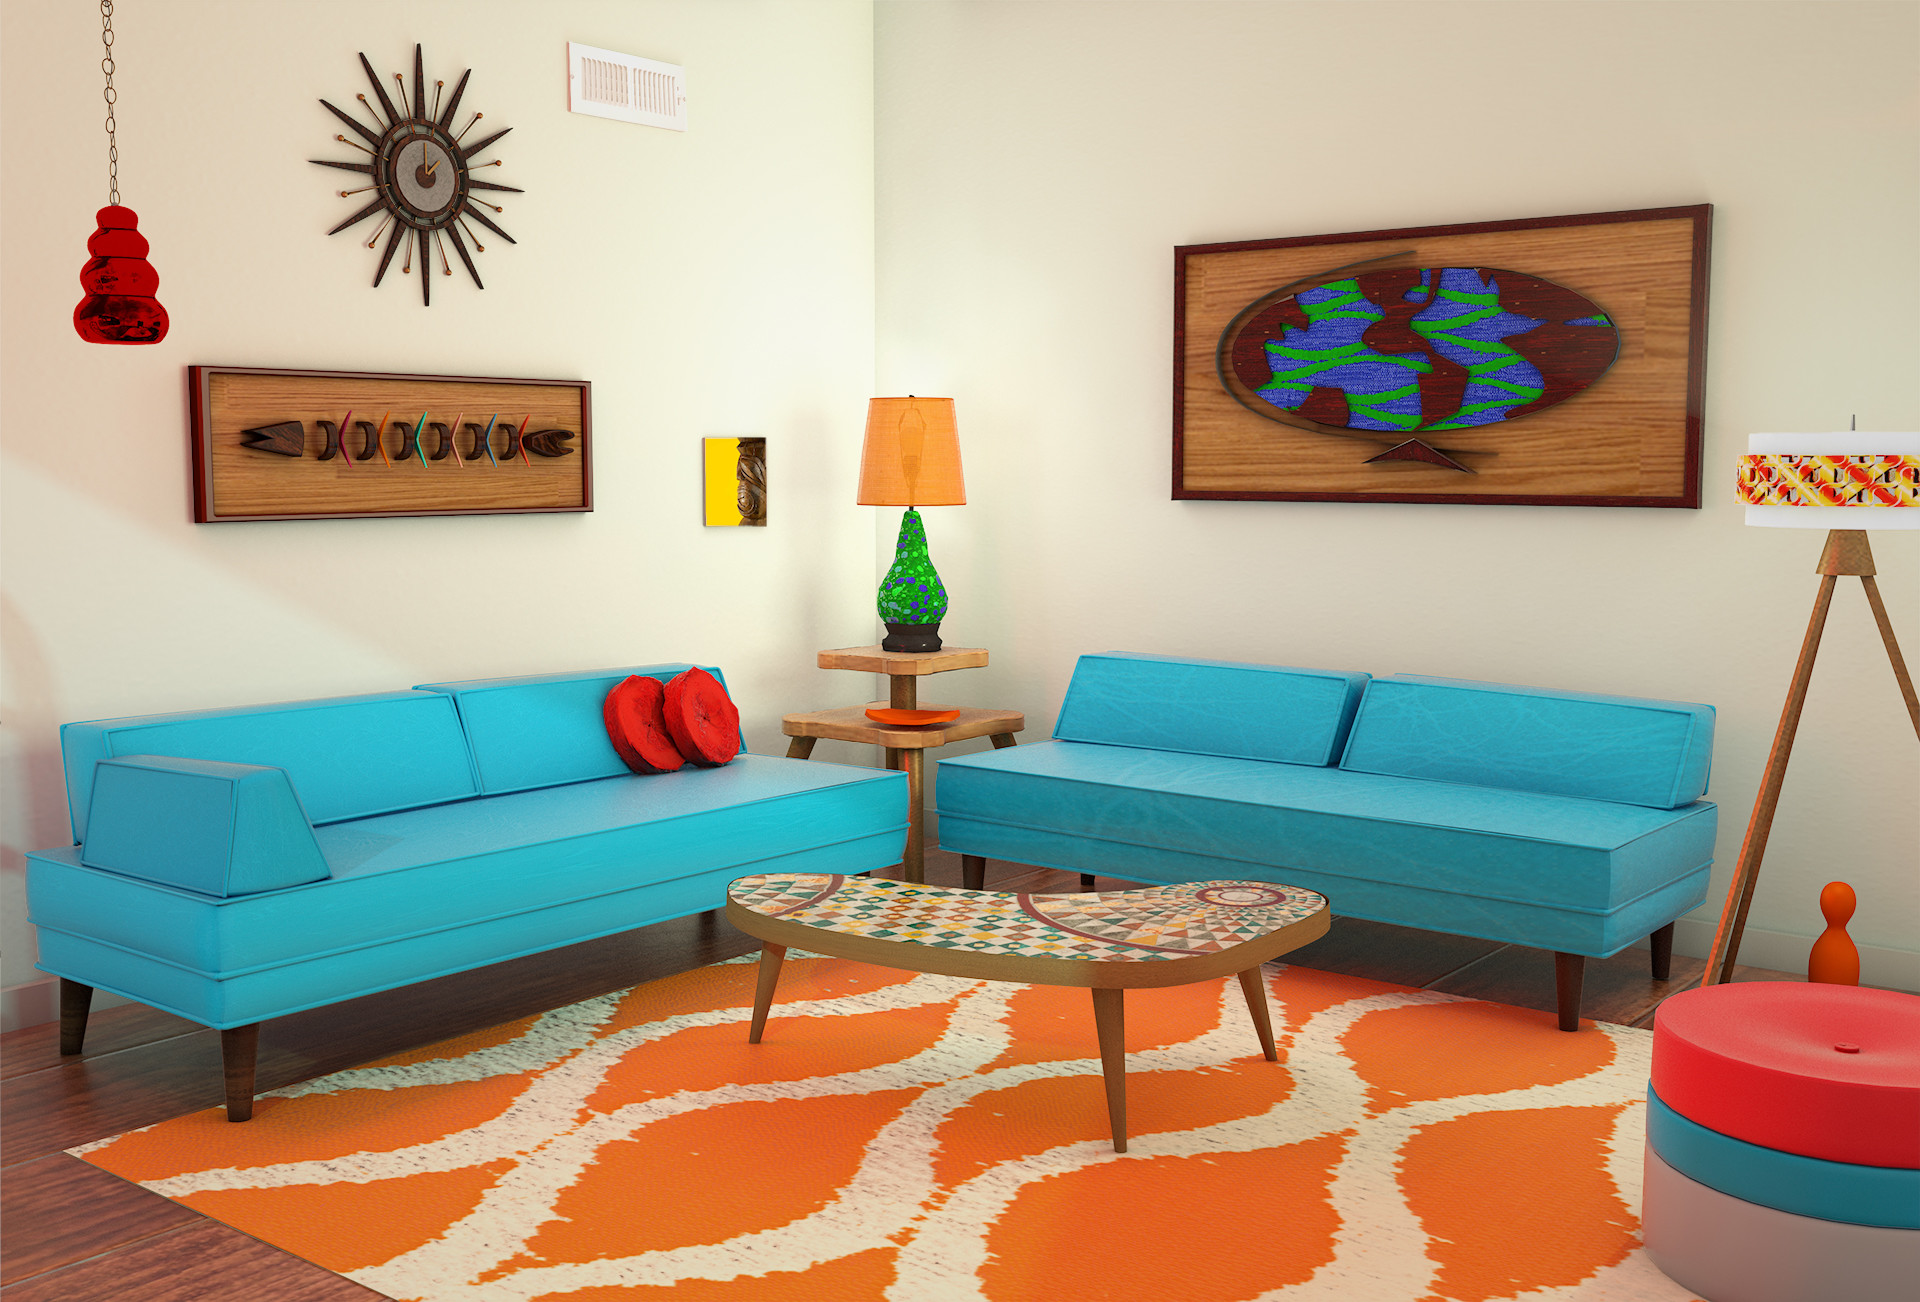 70's style living room